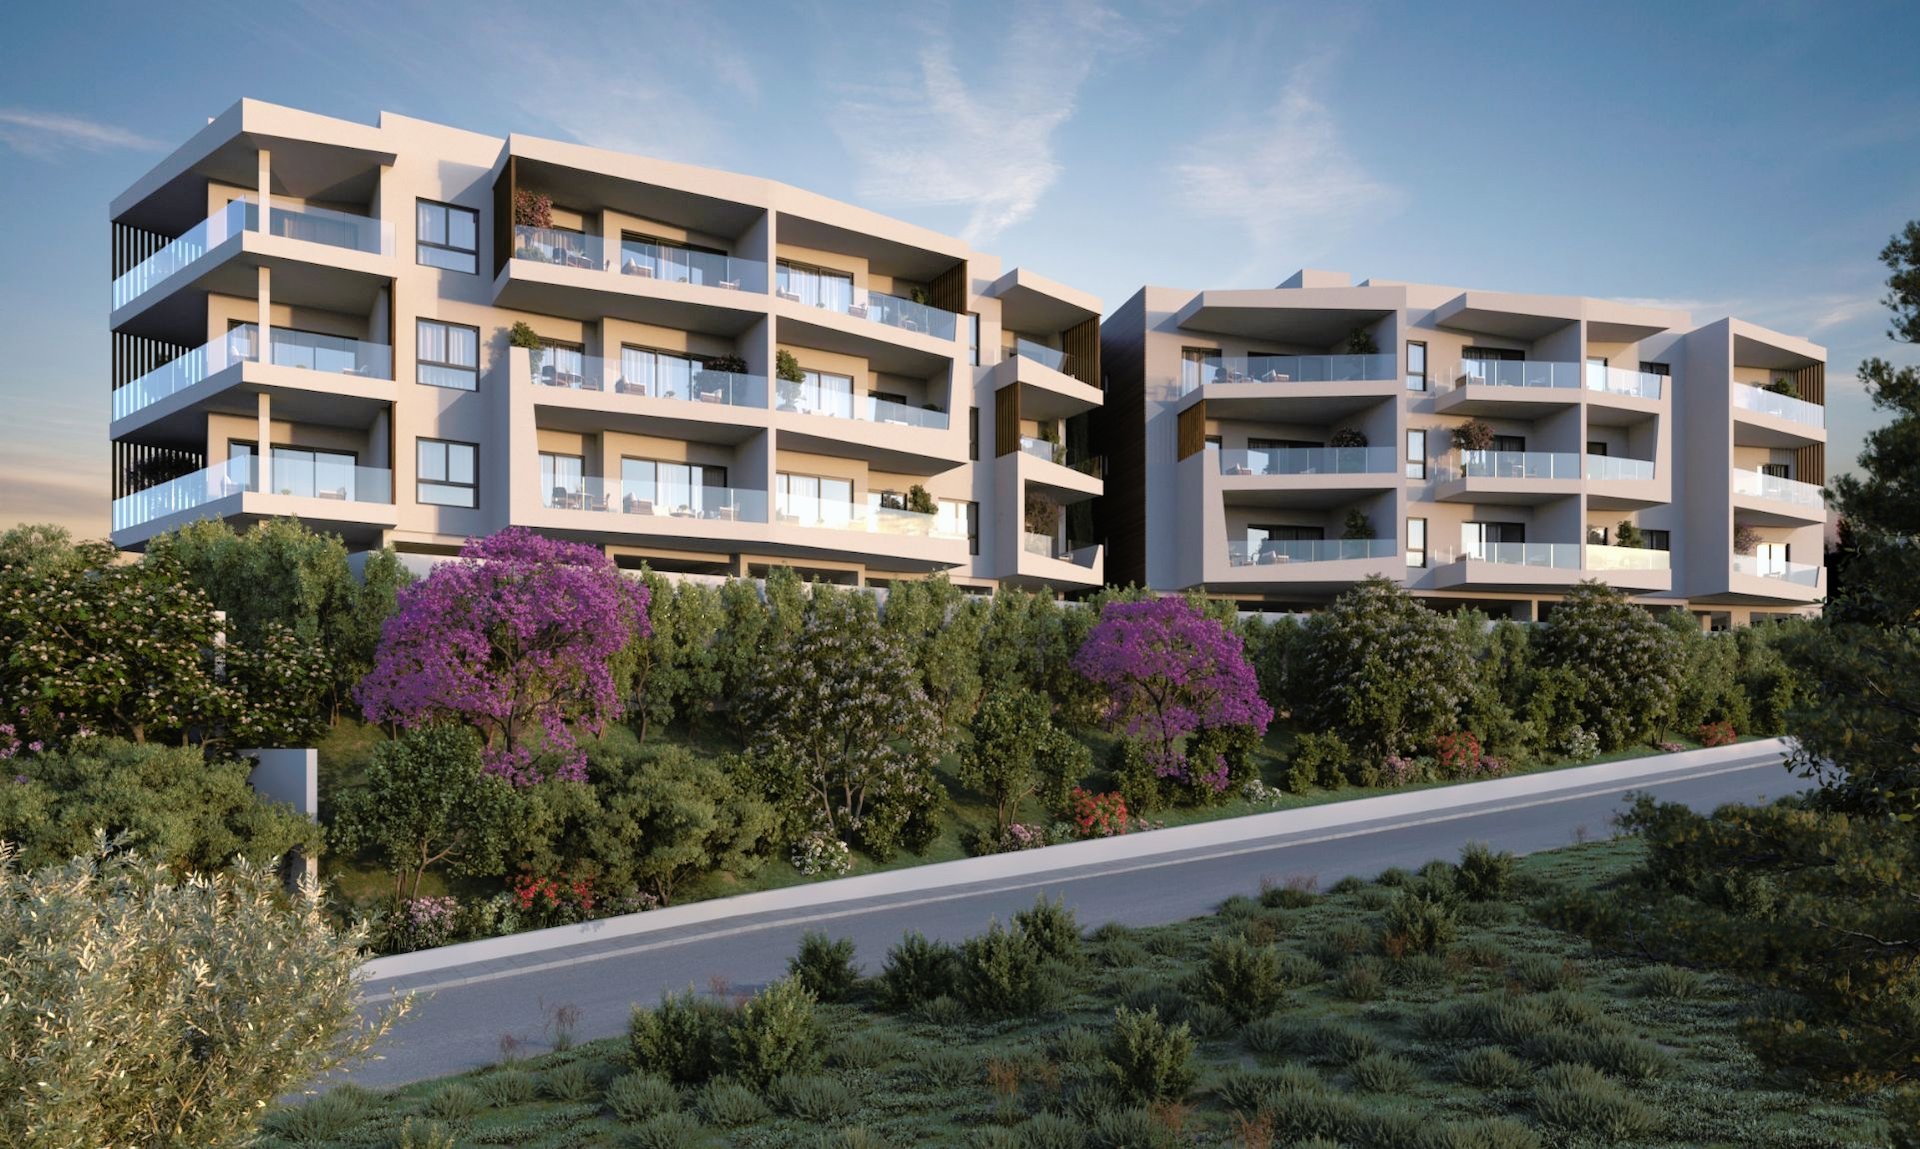 2 Bedroom Apartment for Sale in Limassol – Αgios Athanasios